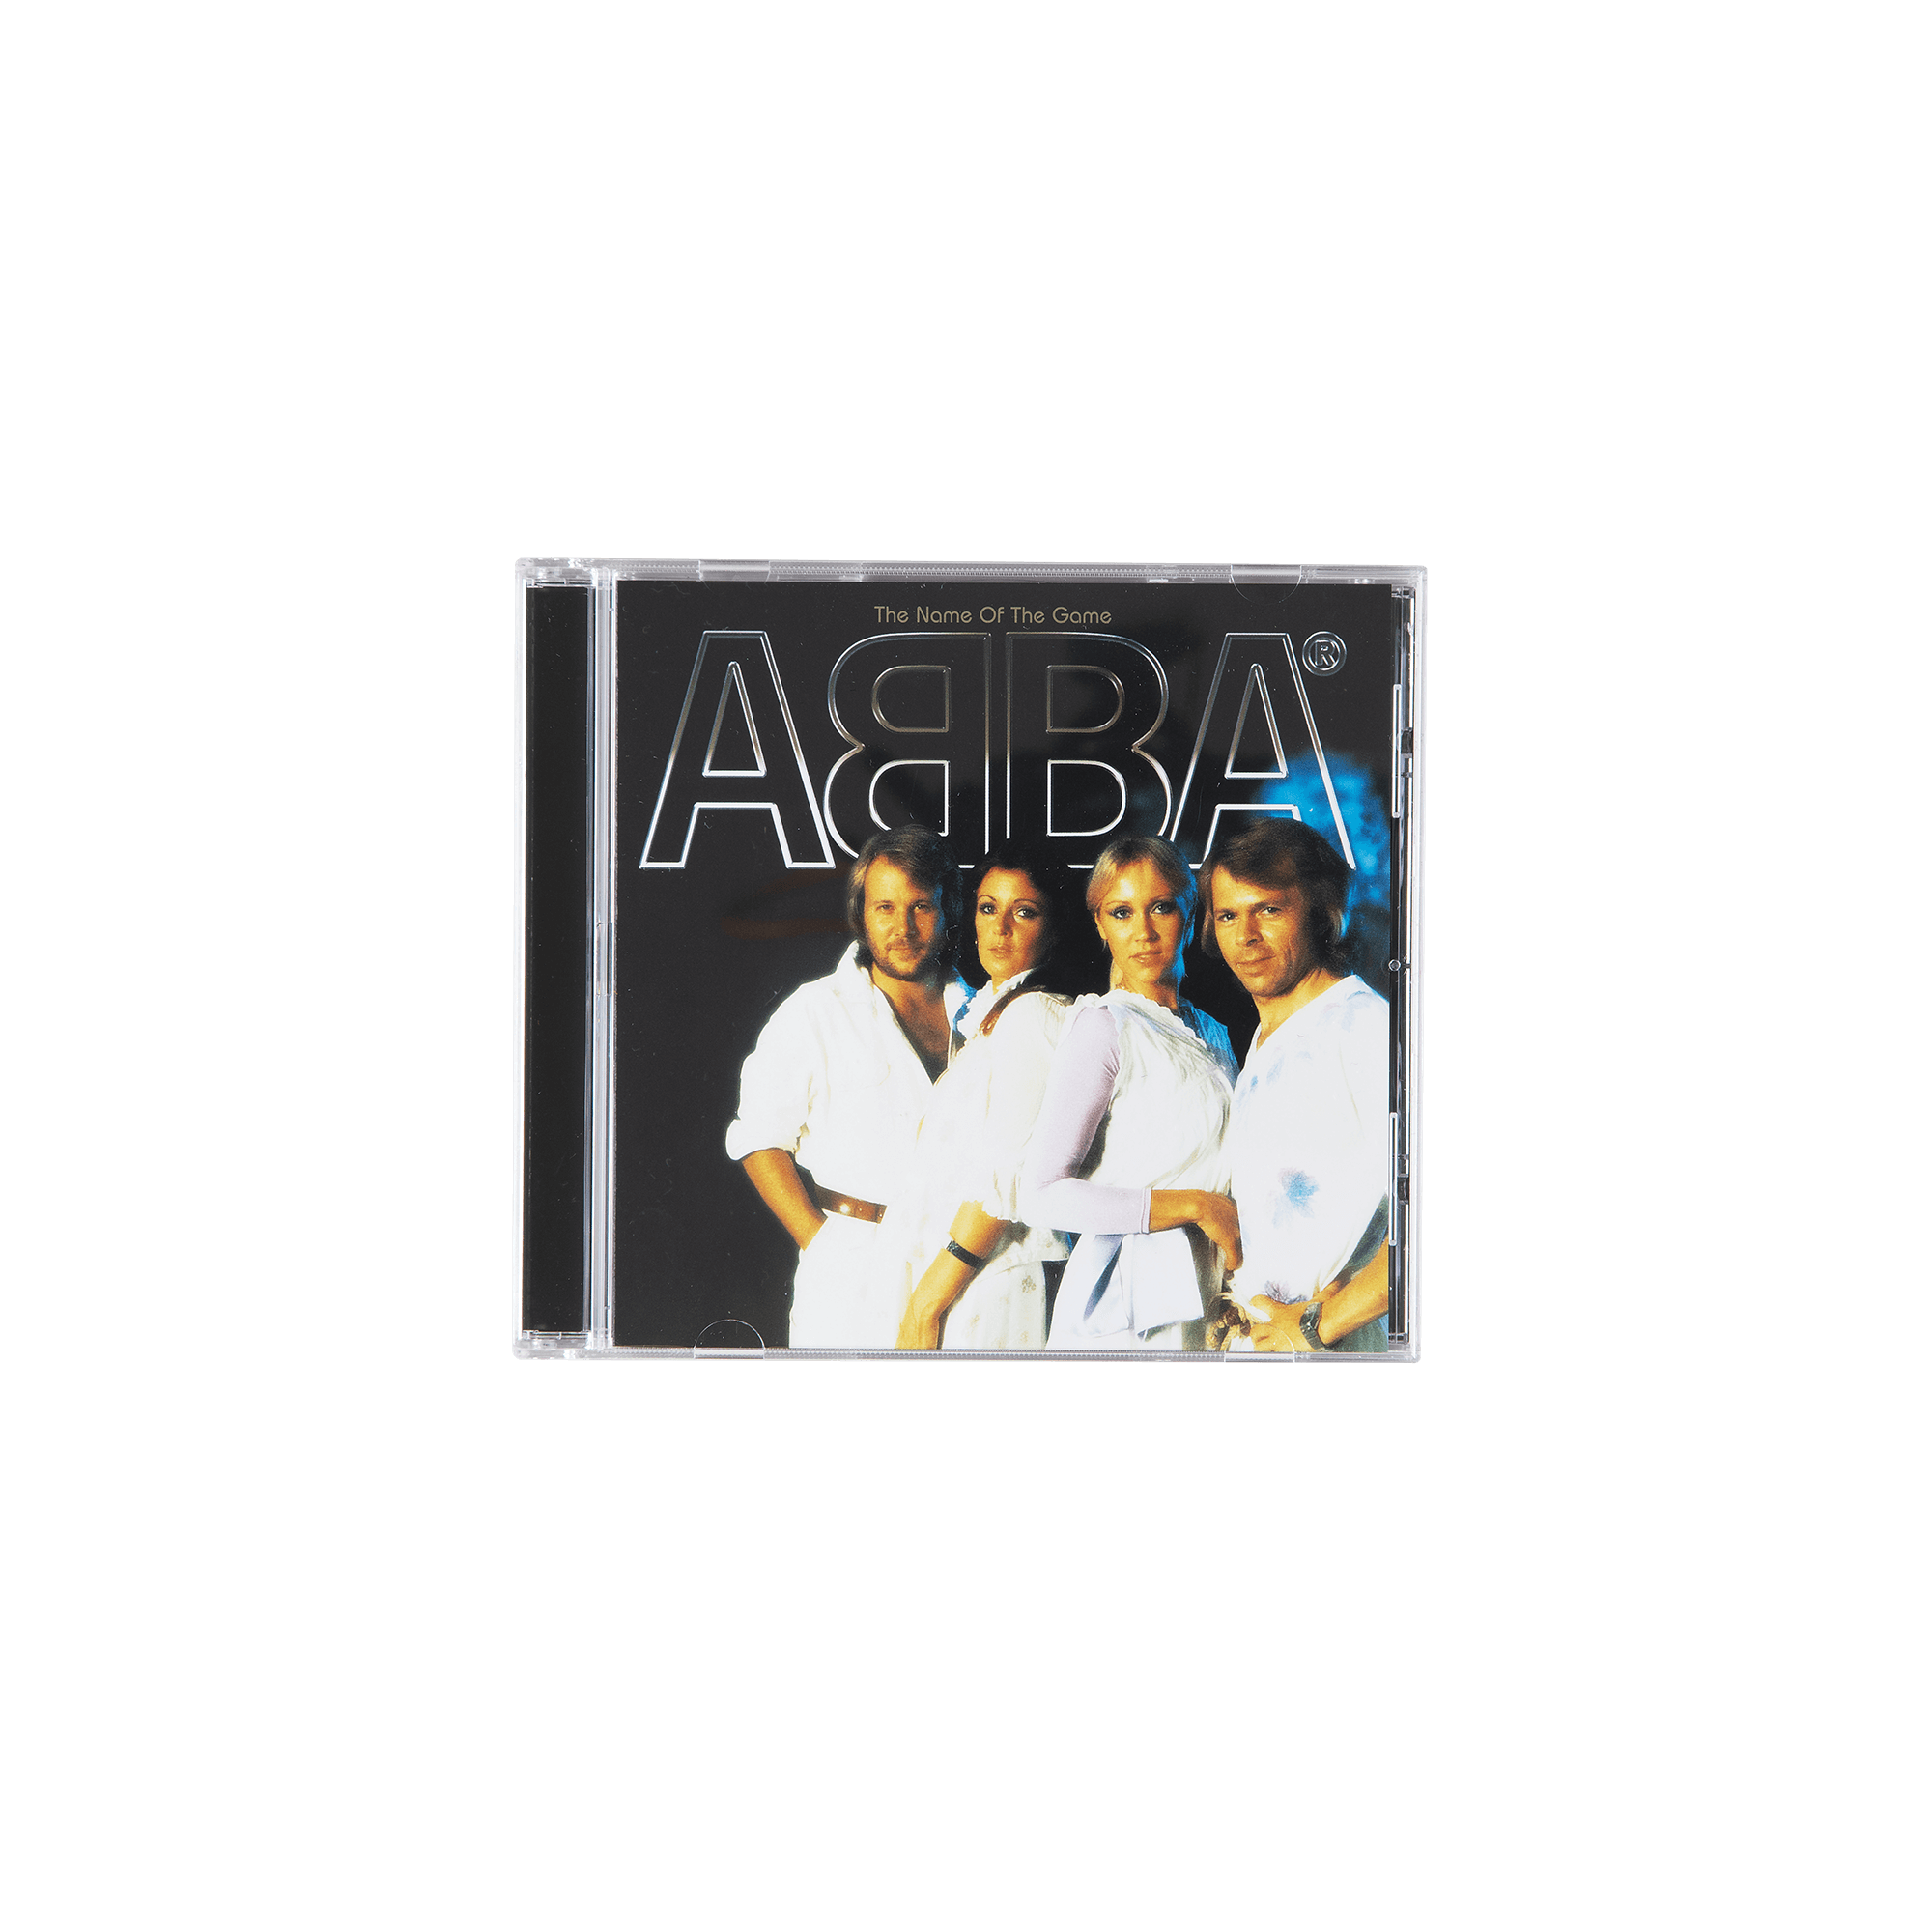 ABBA The name of the game CD